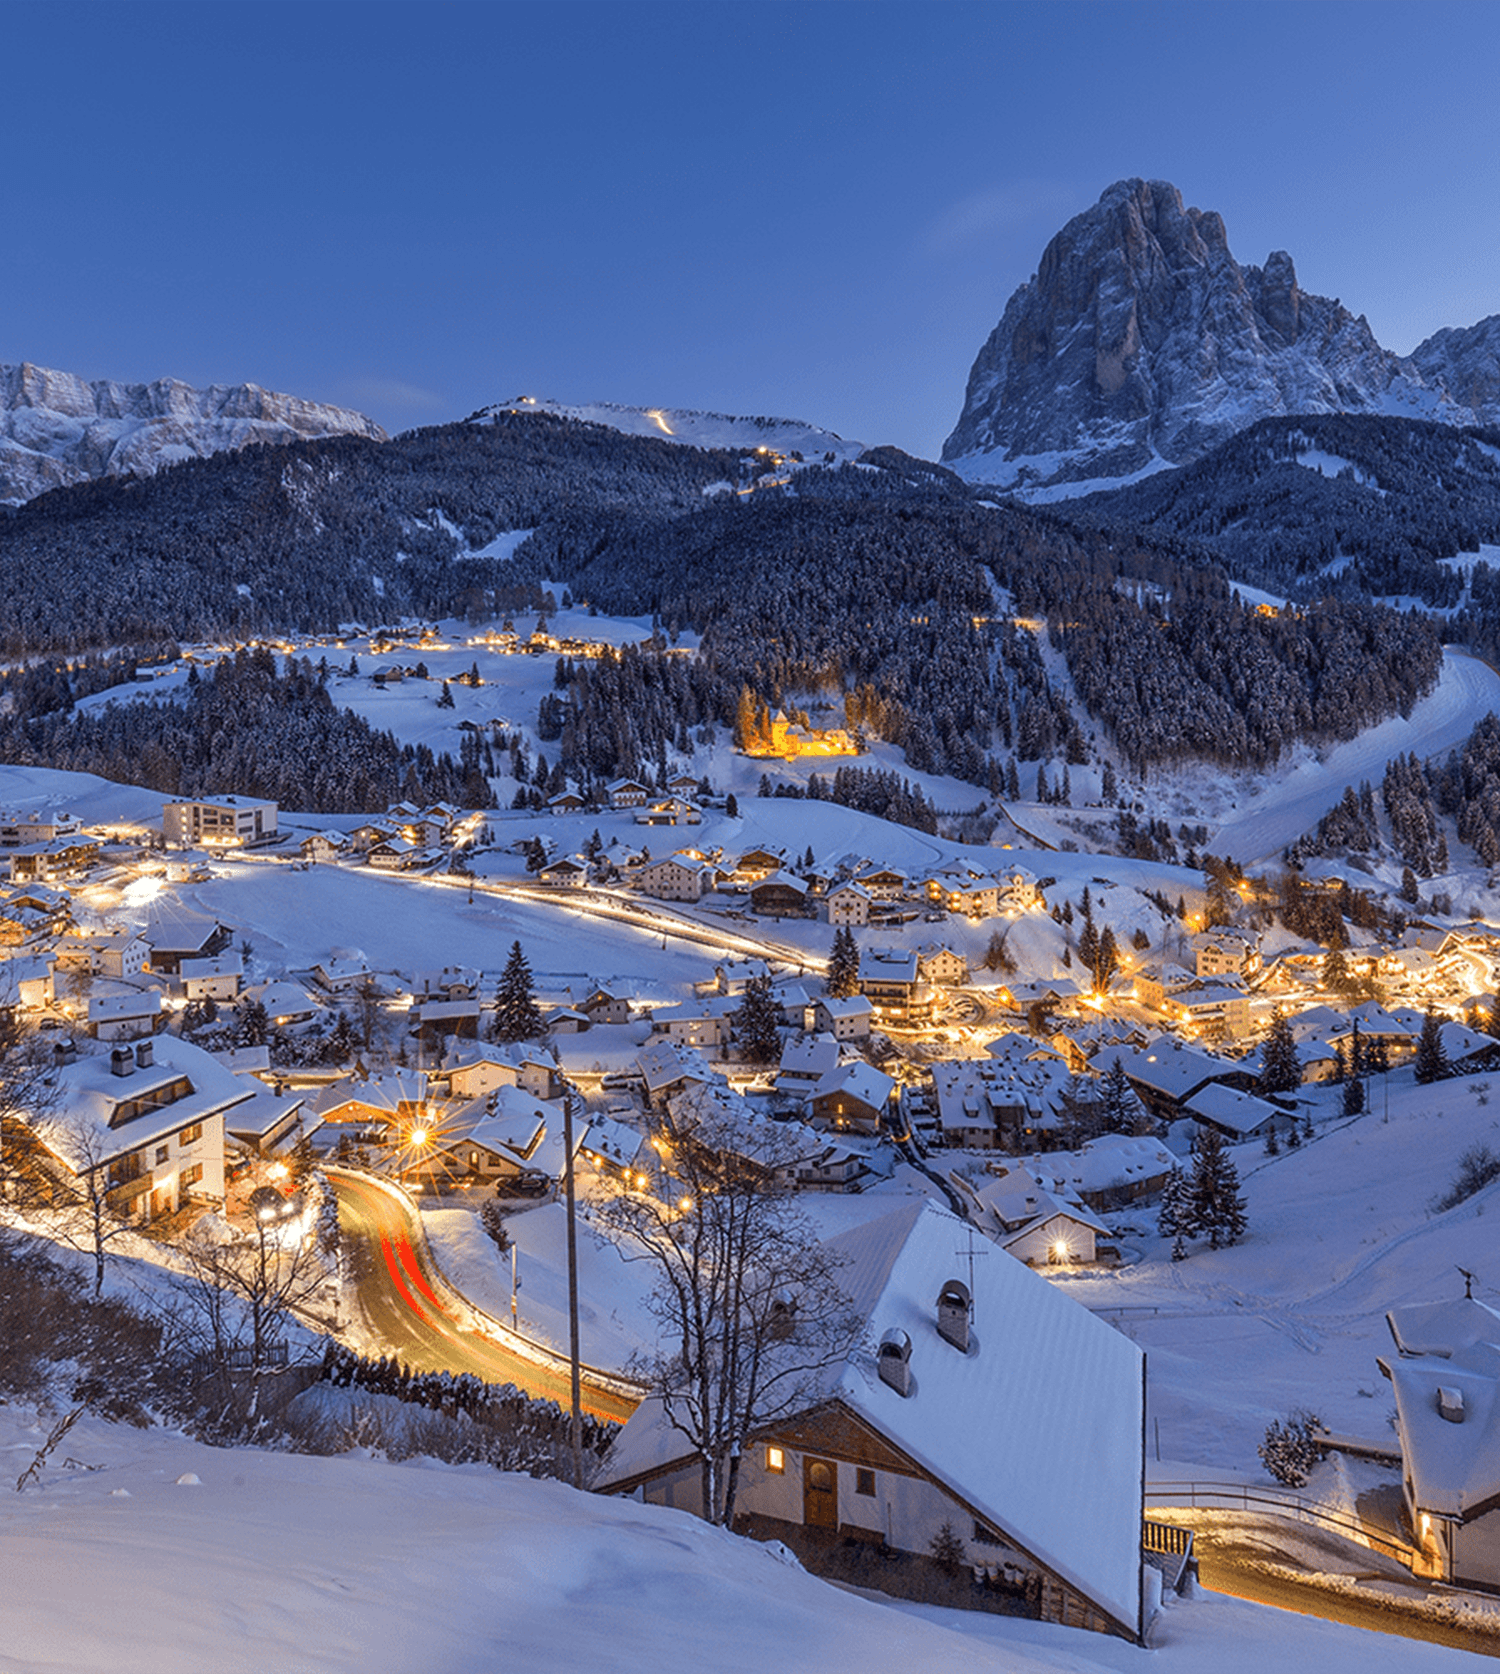 Discover the Dolomites: Much More than skiing